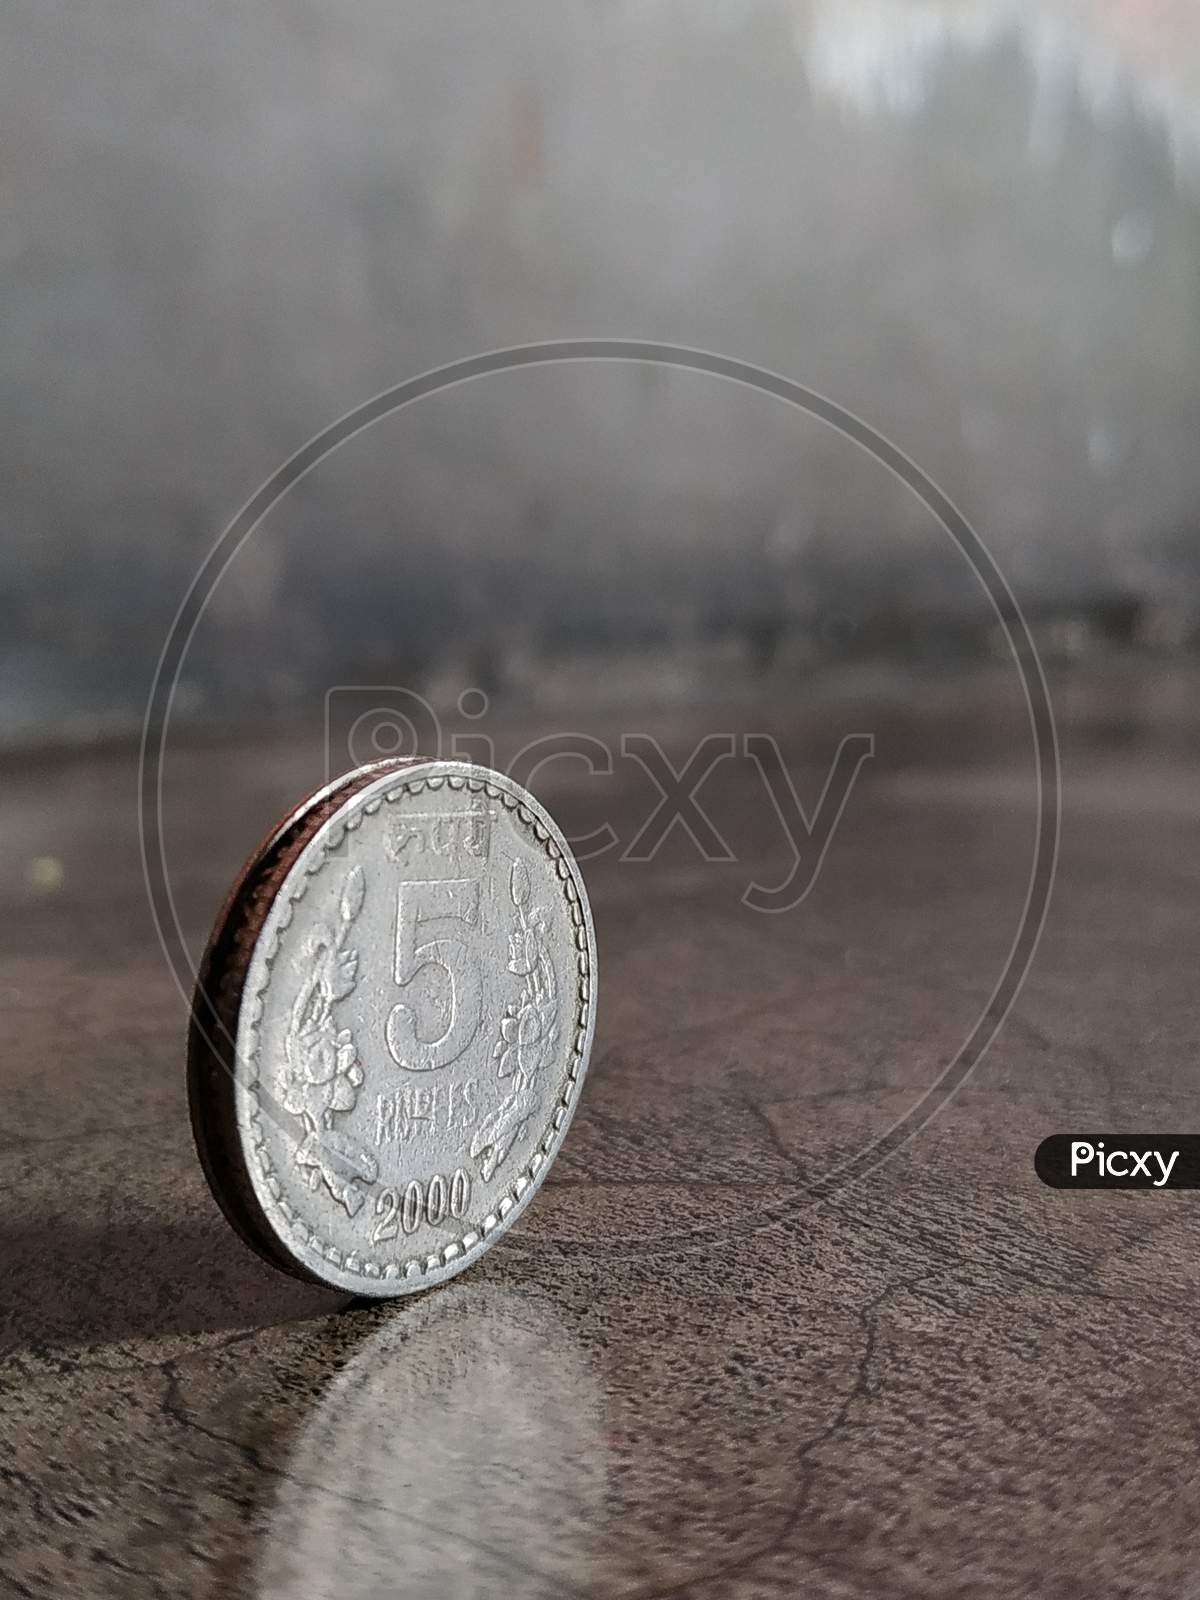 Five rupee coin image